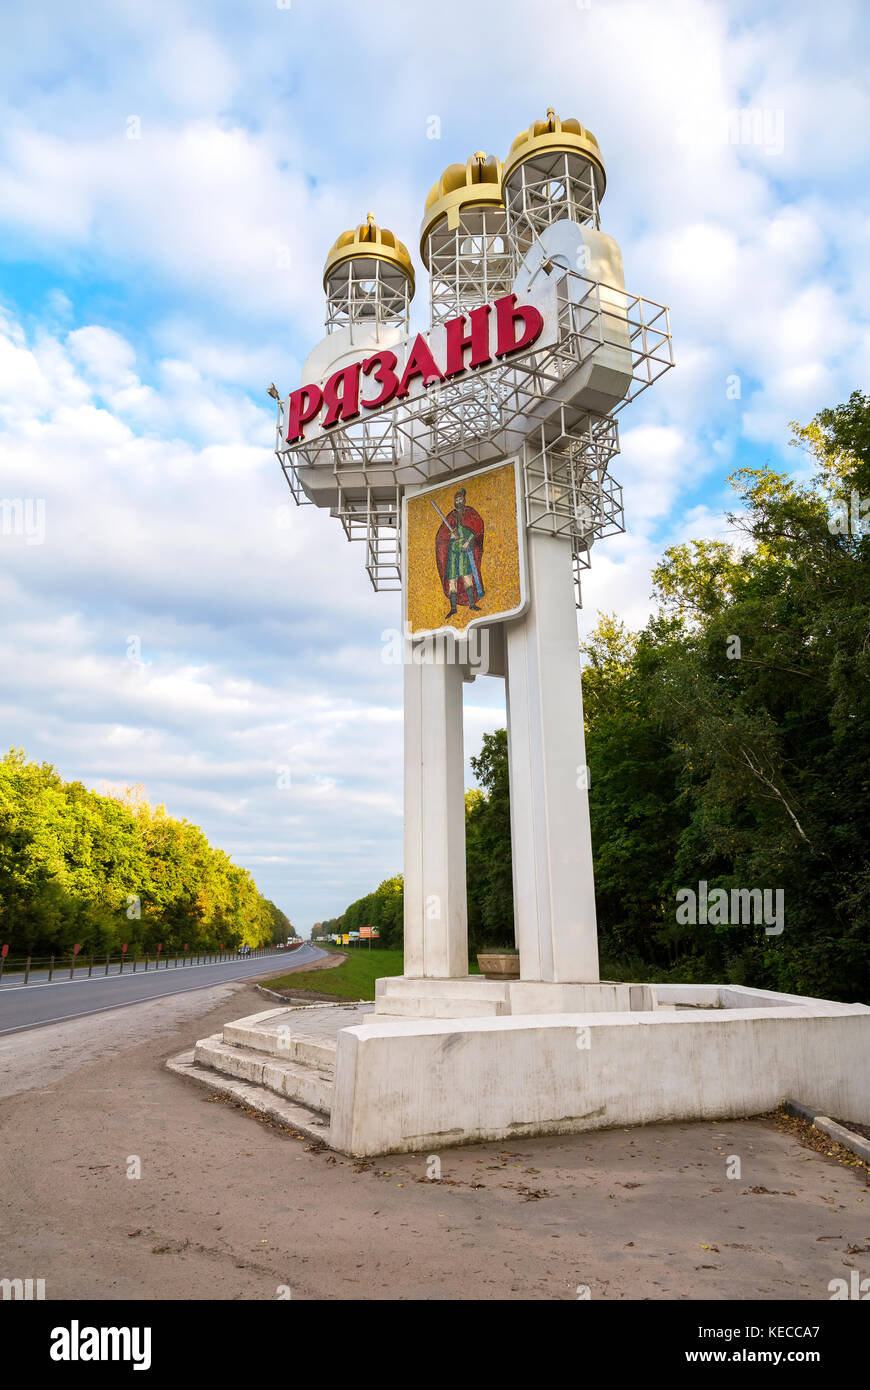 Ryazan, Russia - September 01, 2017: Stella, a road sign at the entrance to the city with the inscription 'Ryazan' in Russian Stock Photo